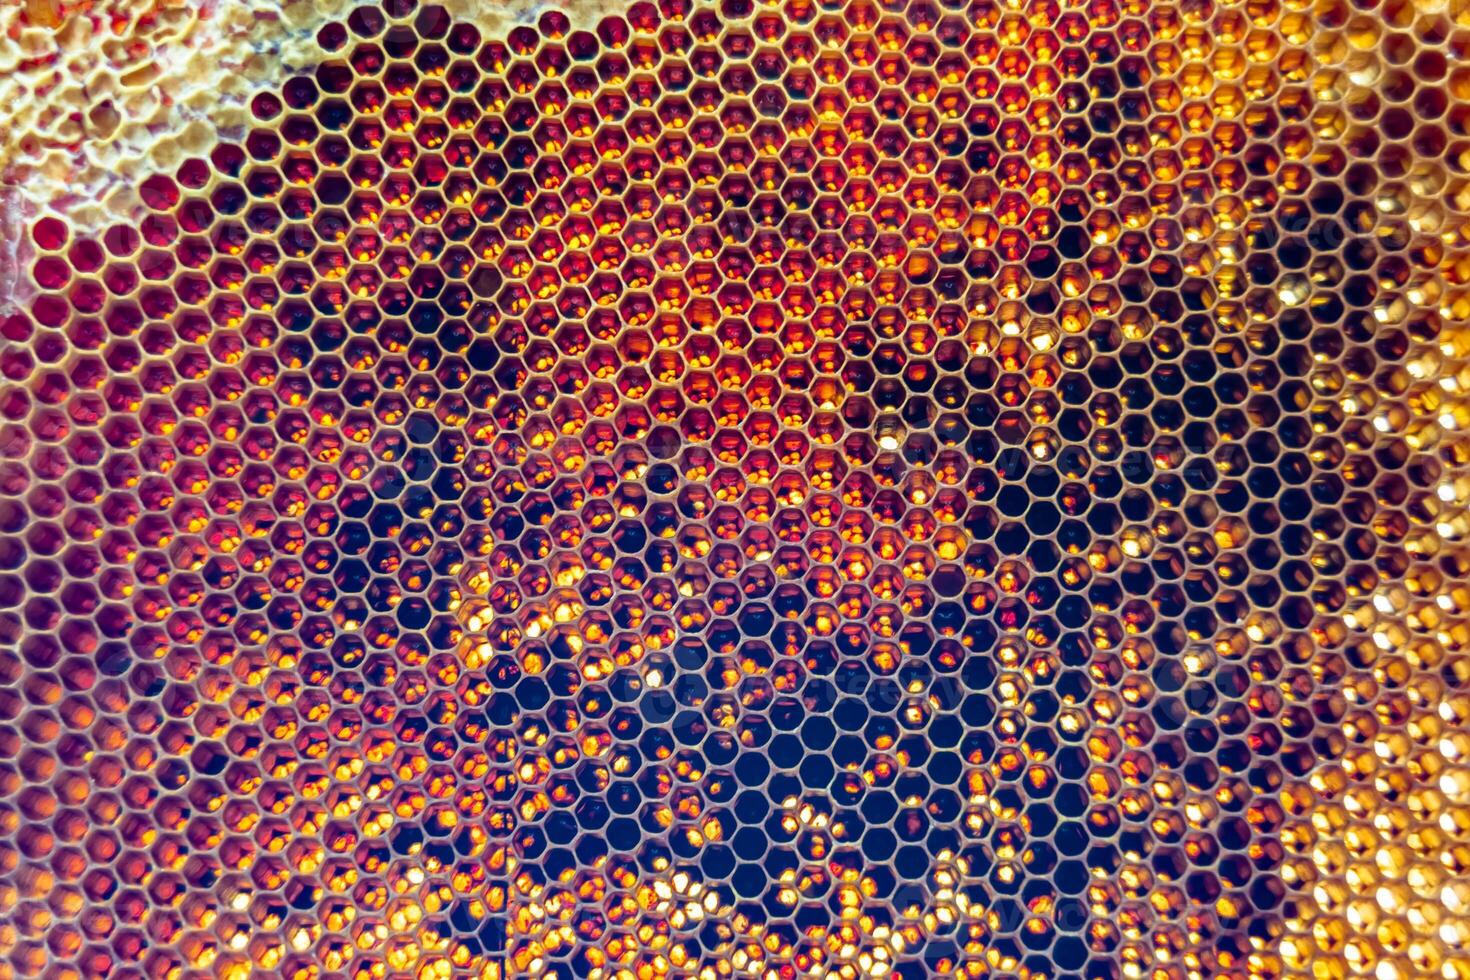 Drop of bee honey drip from hexagonal honeycombs filled with golden nectar photo